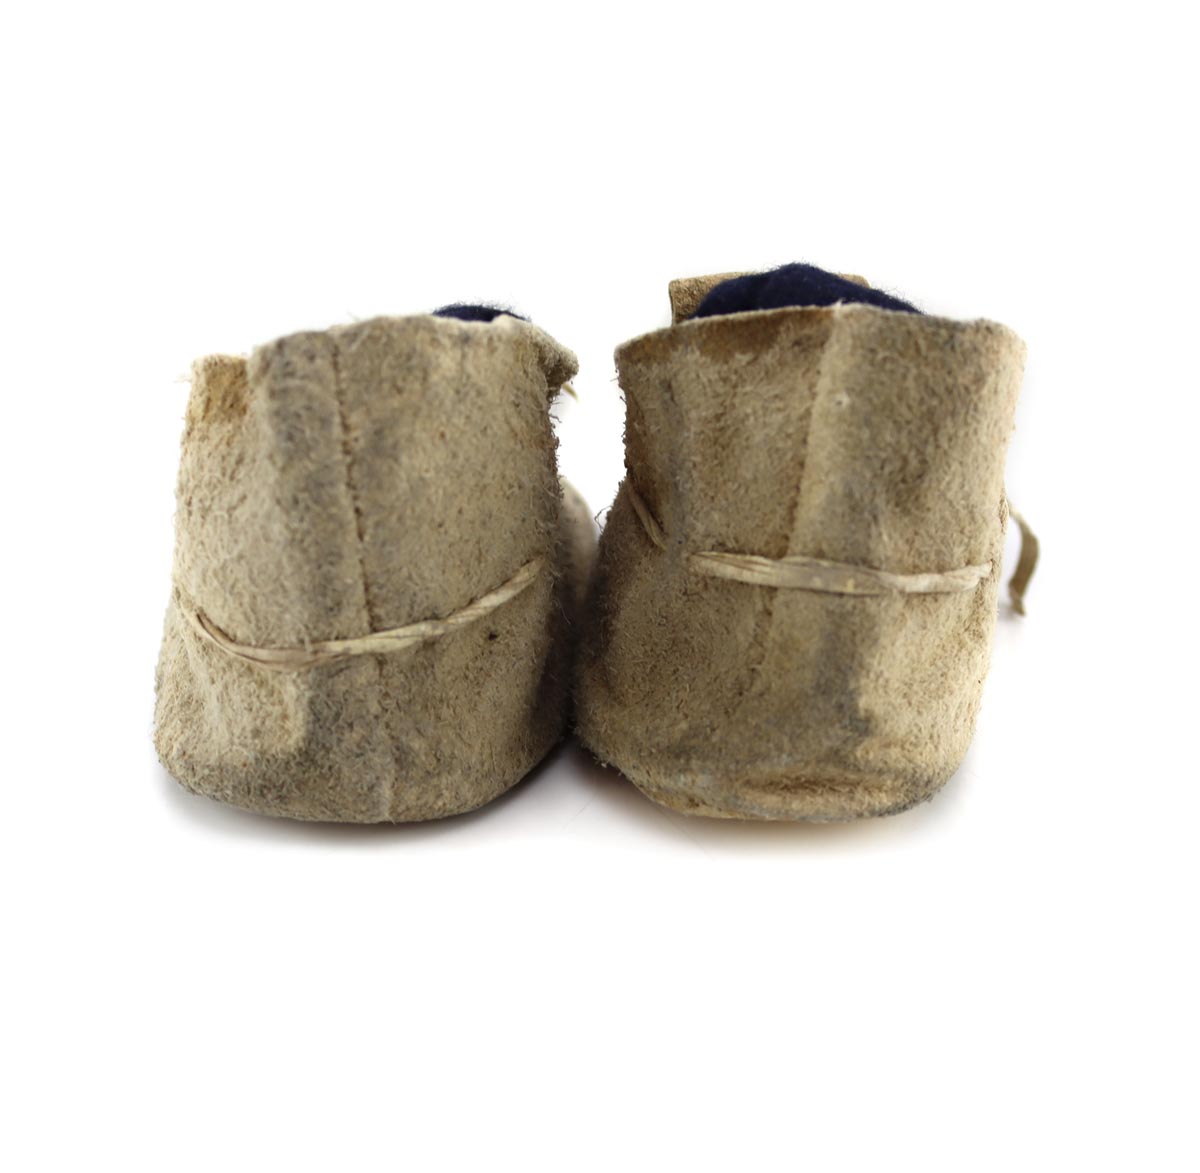 Northern Plains Beaded Leather Moccasins c. 1890s, 2.75" x 7.5" x 3" (DW91963-1123-006)